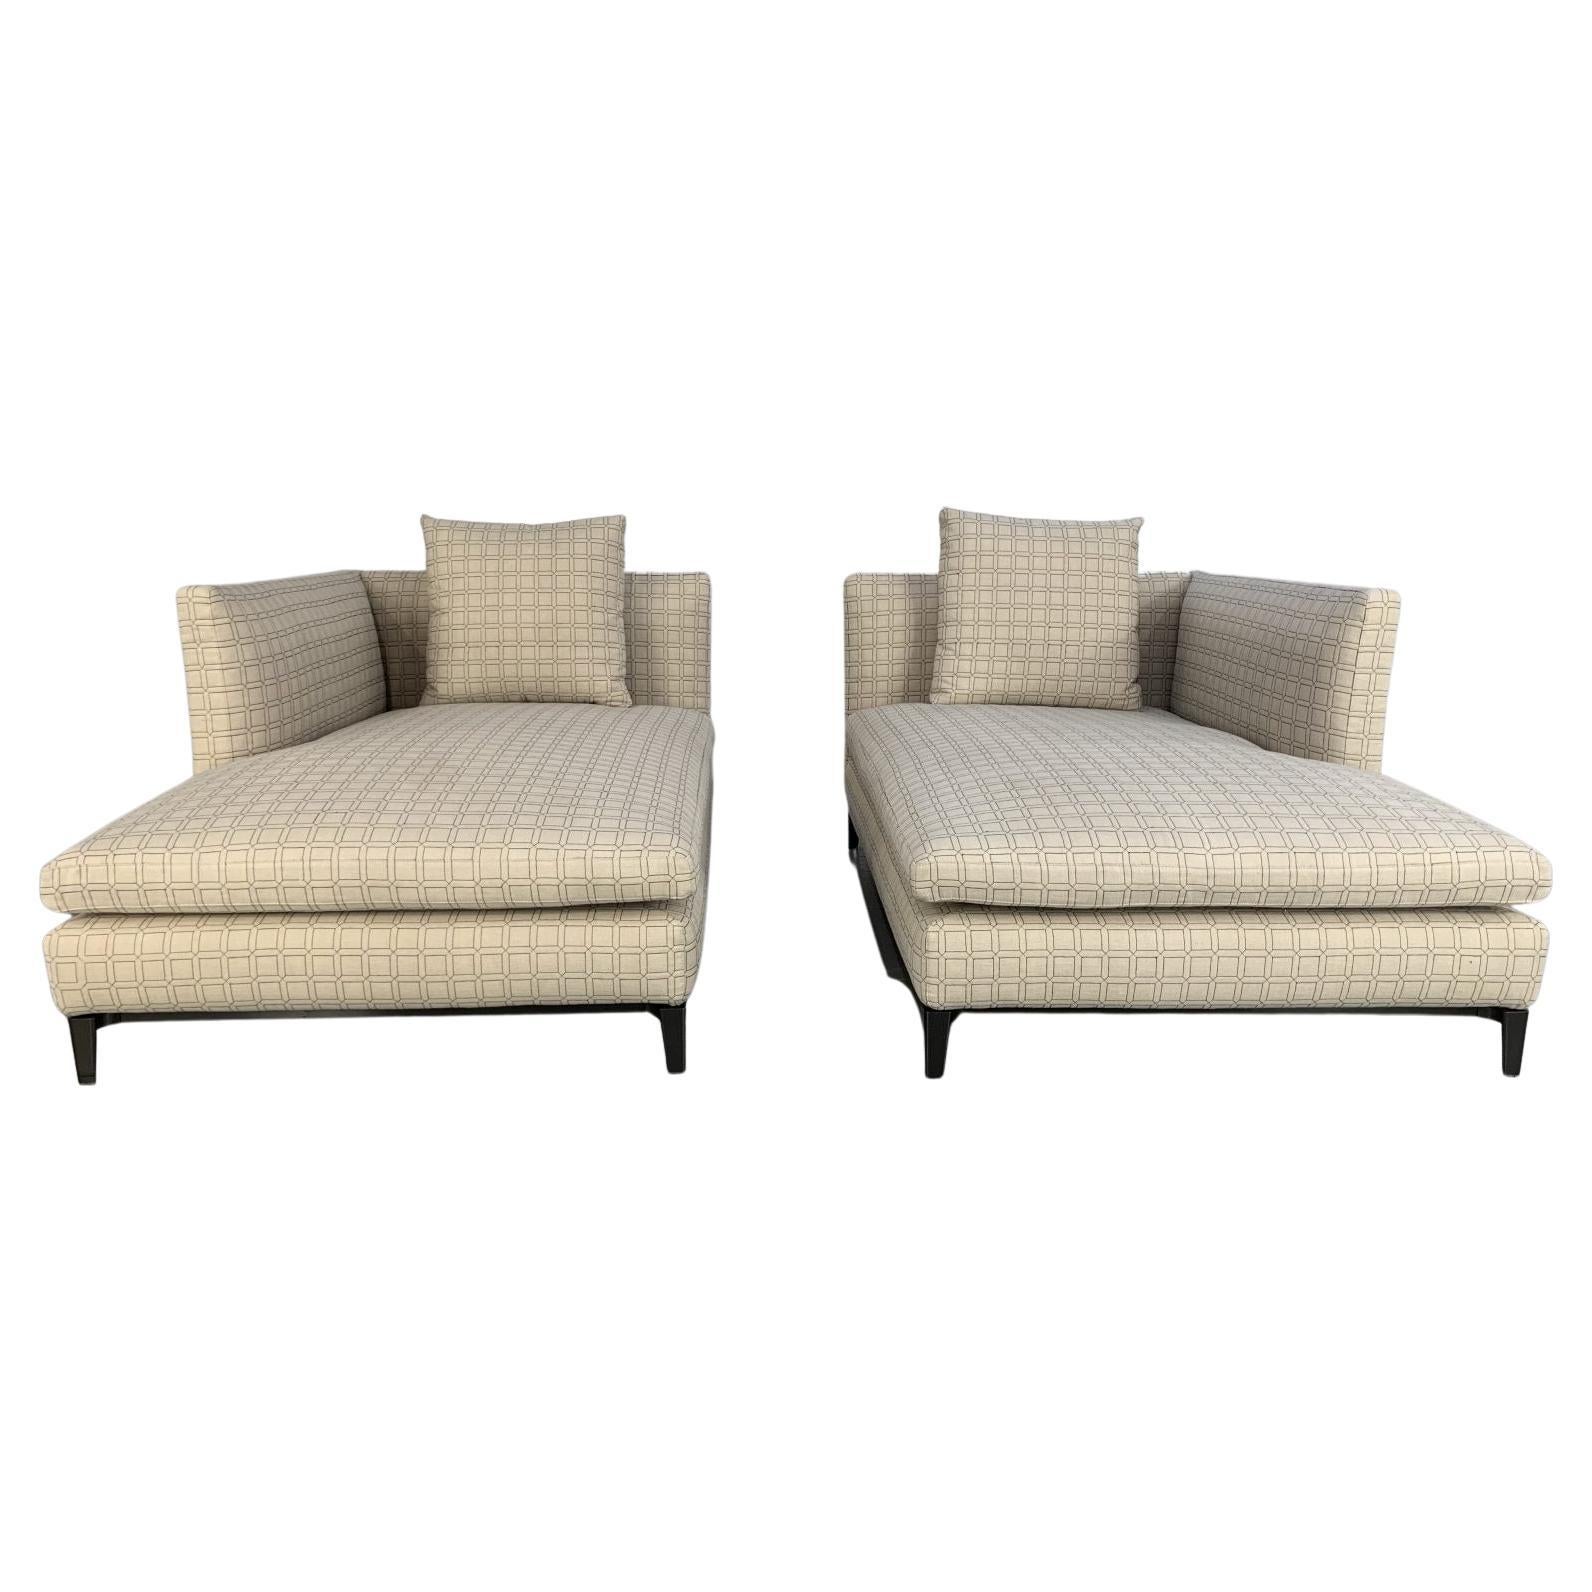 Superb Pair of Minotti “Andersen” Chaise Sofas Daybed in Geometric Linen Fabric For Sale